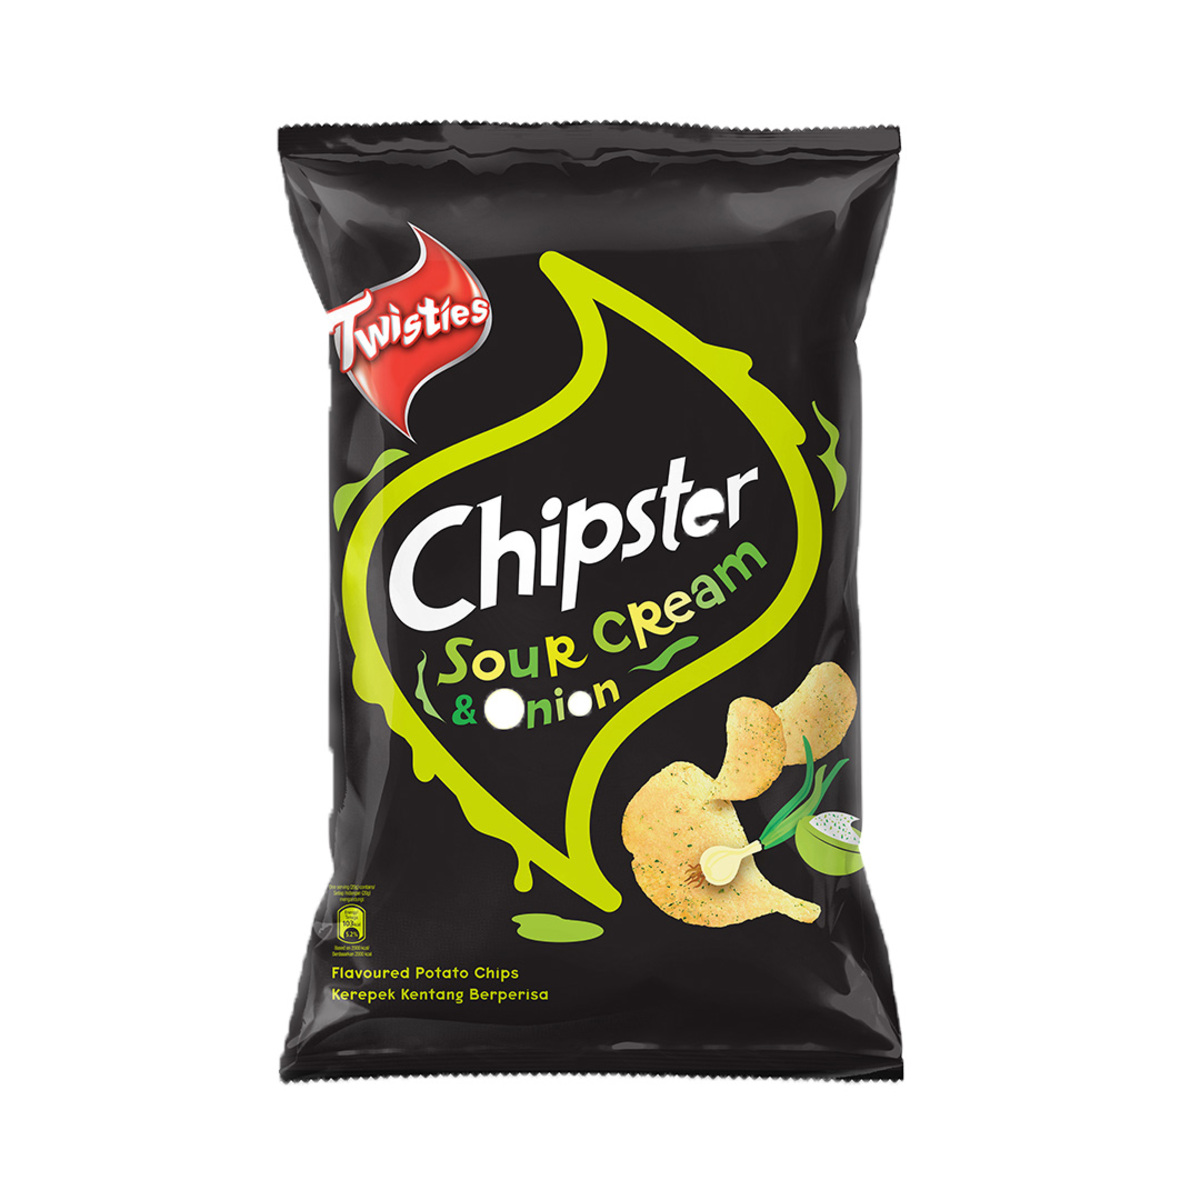 Twisties Chipster Sour Cream Onion 130g